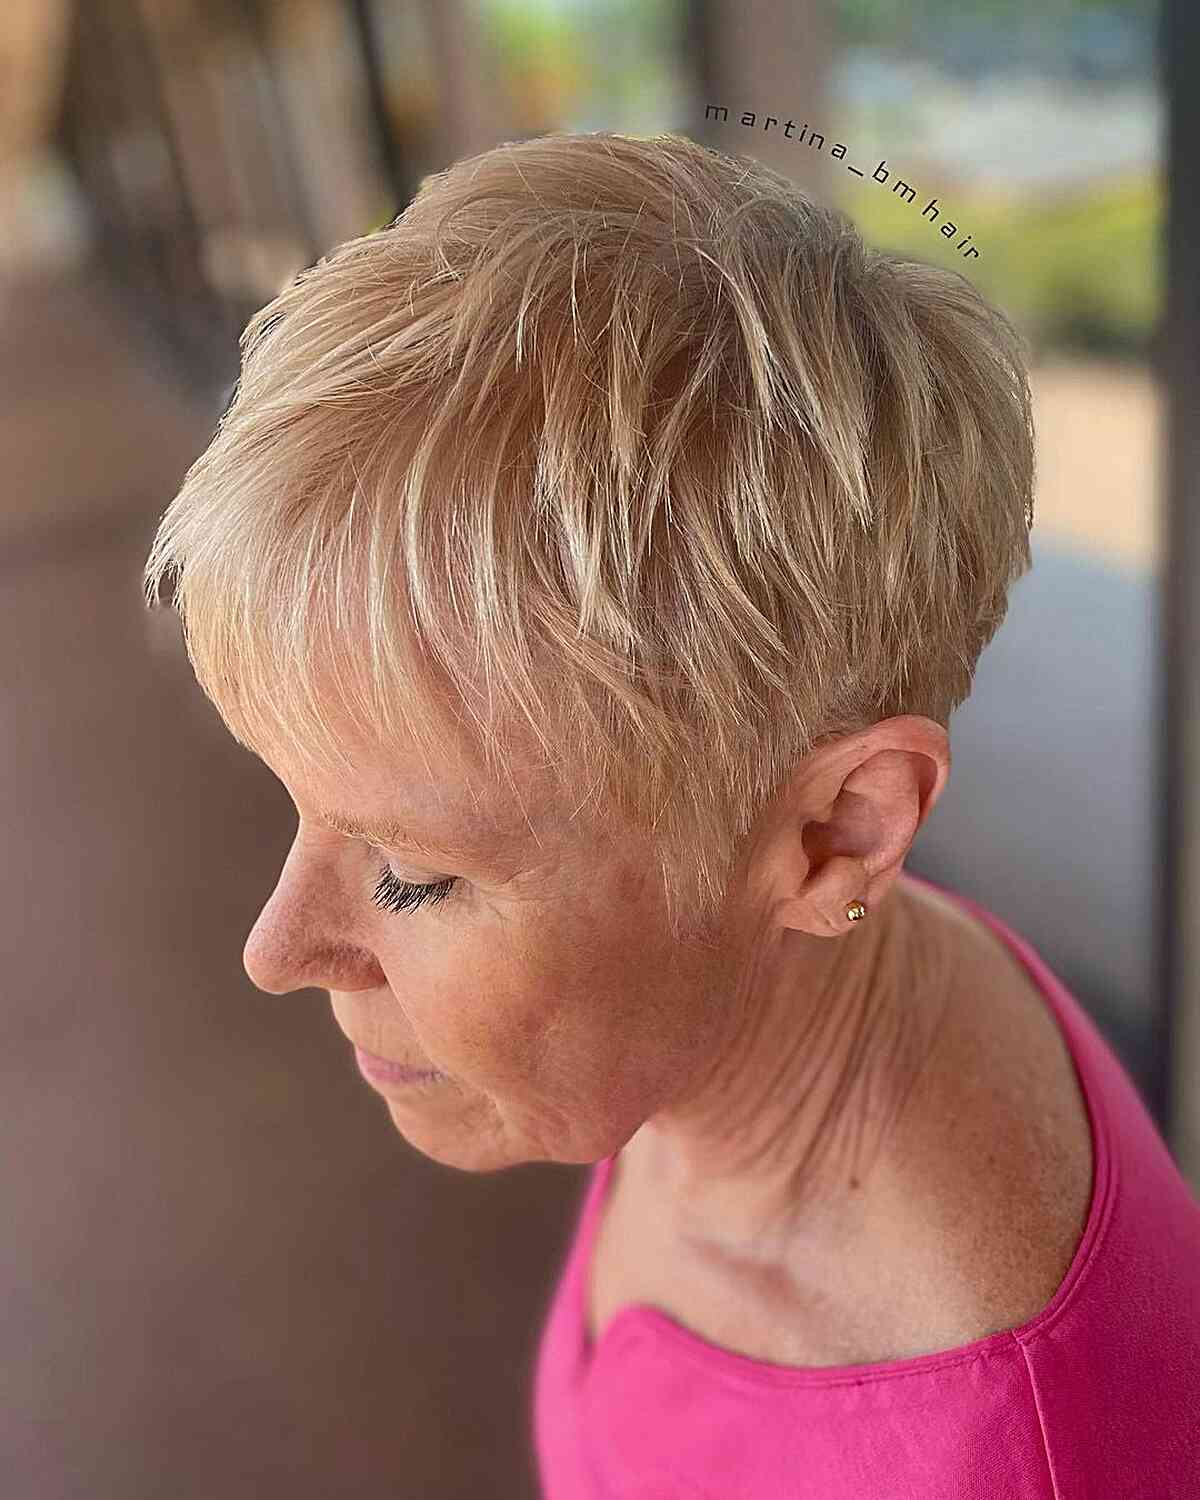 Textured Choppy Pixie Crop Cut with Wispy Bangs for mature women aged 60 with Thin Locks